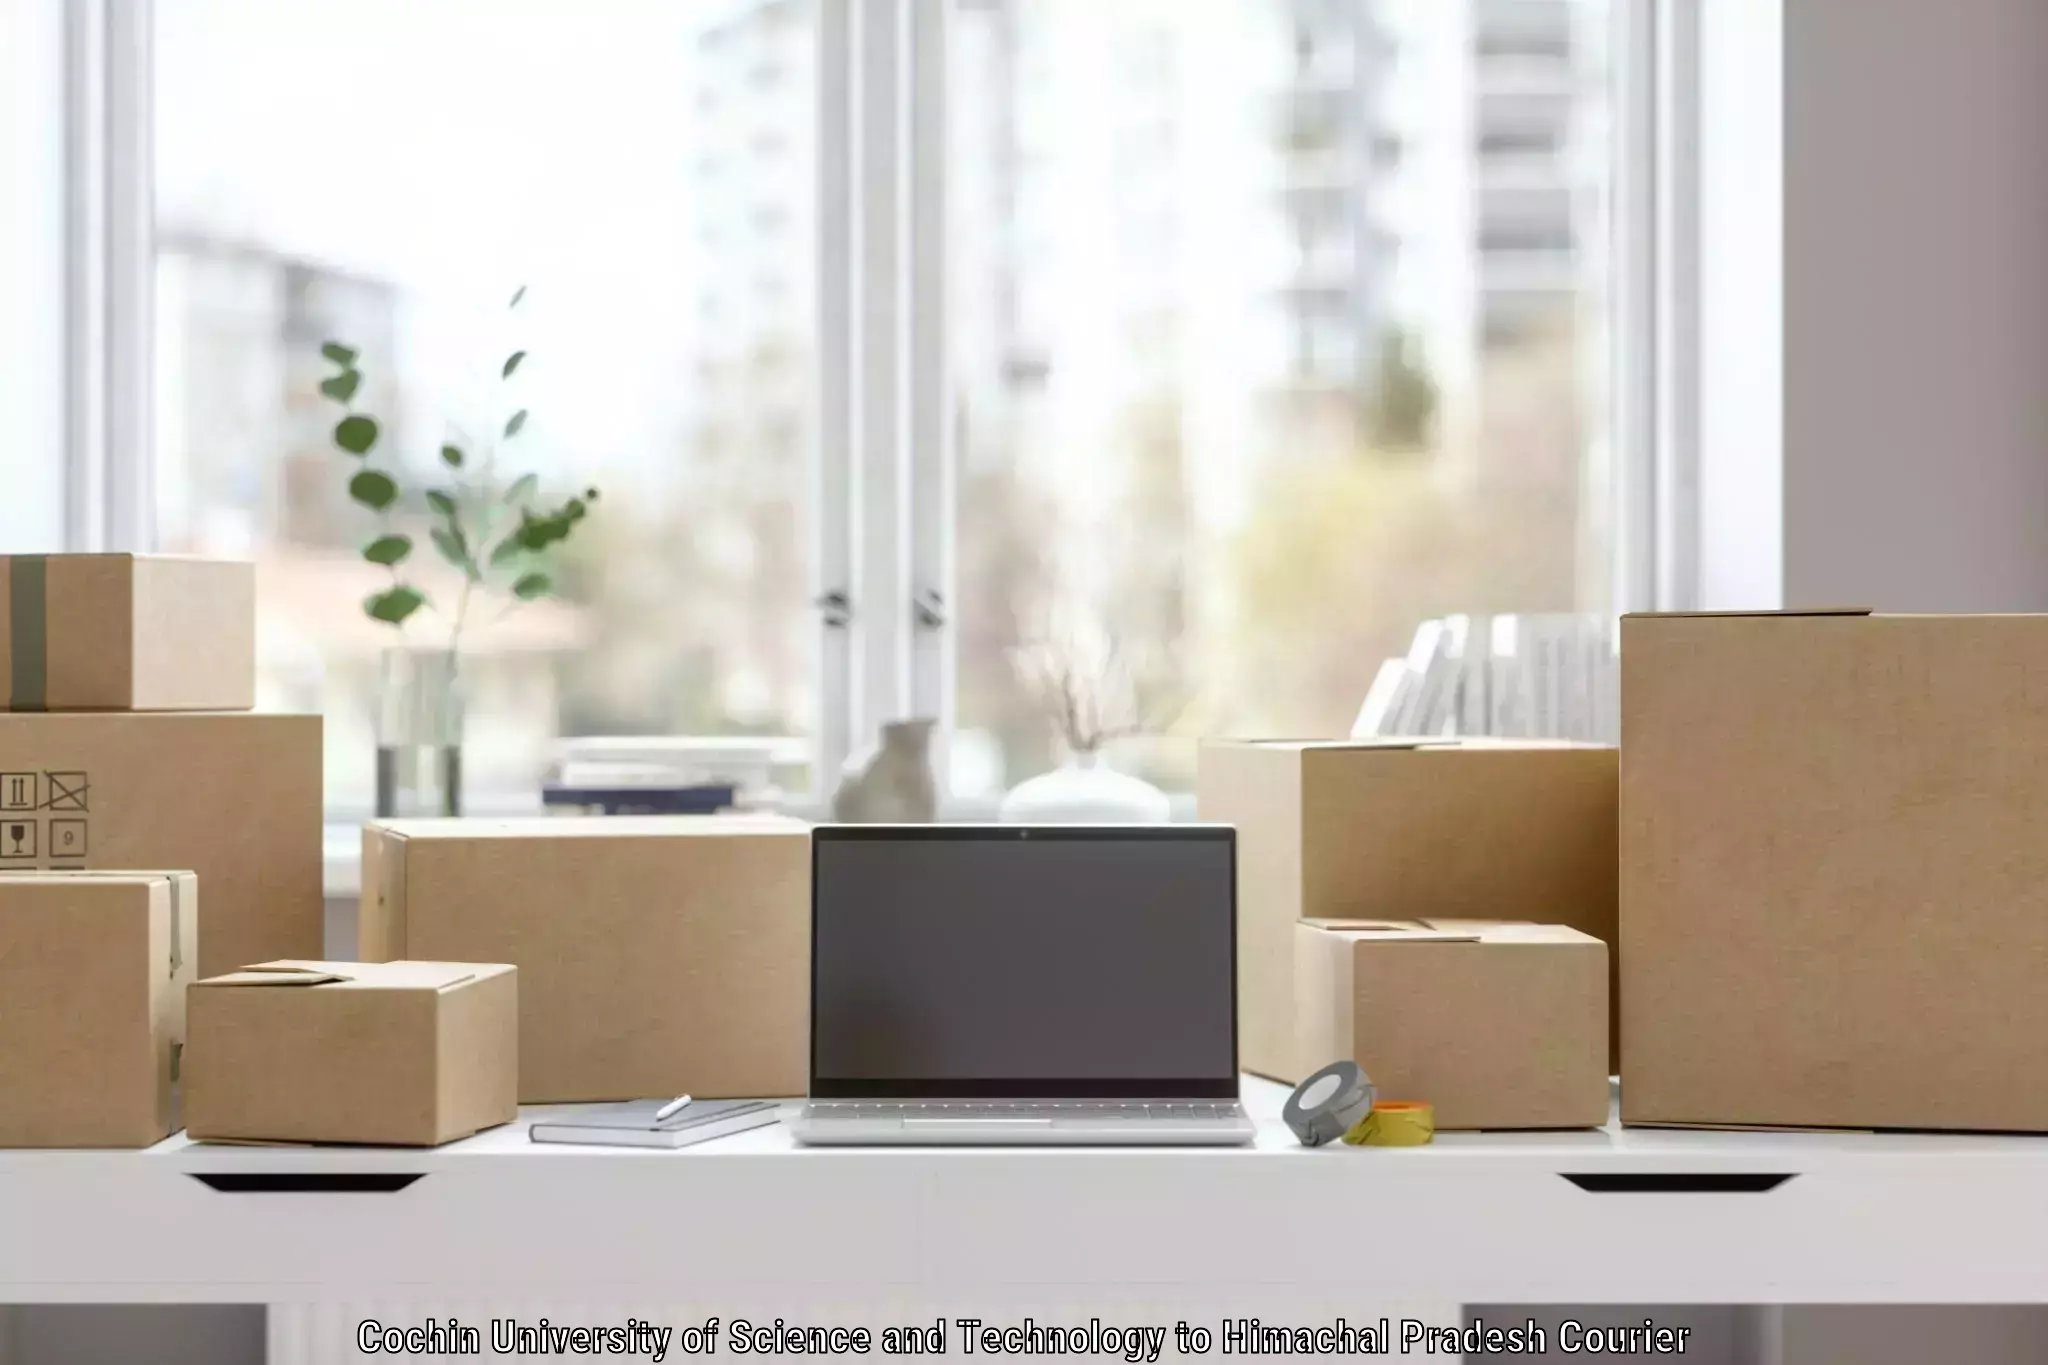 Personalized moving service Cochin University of Science and Technology to Rehan